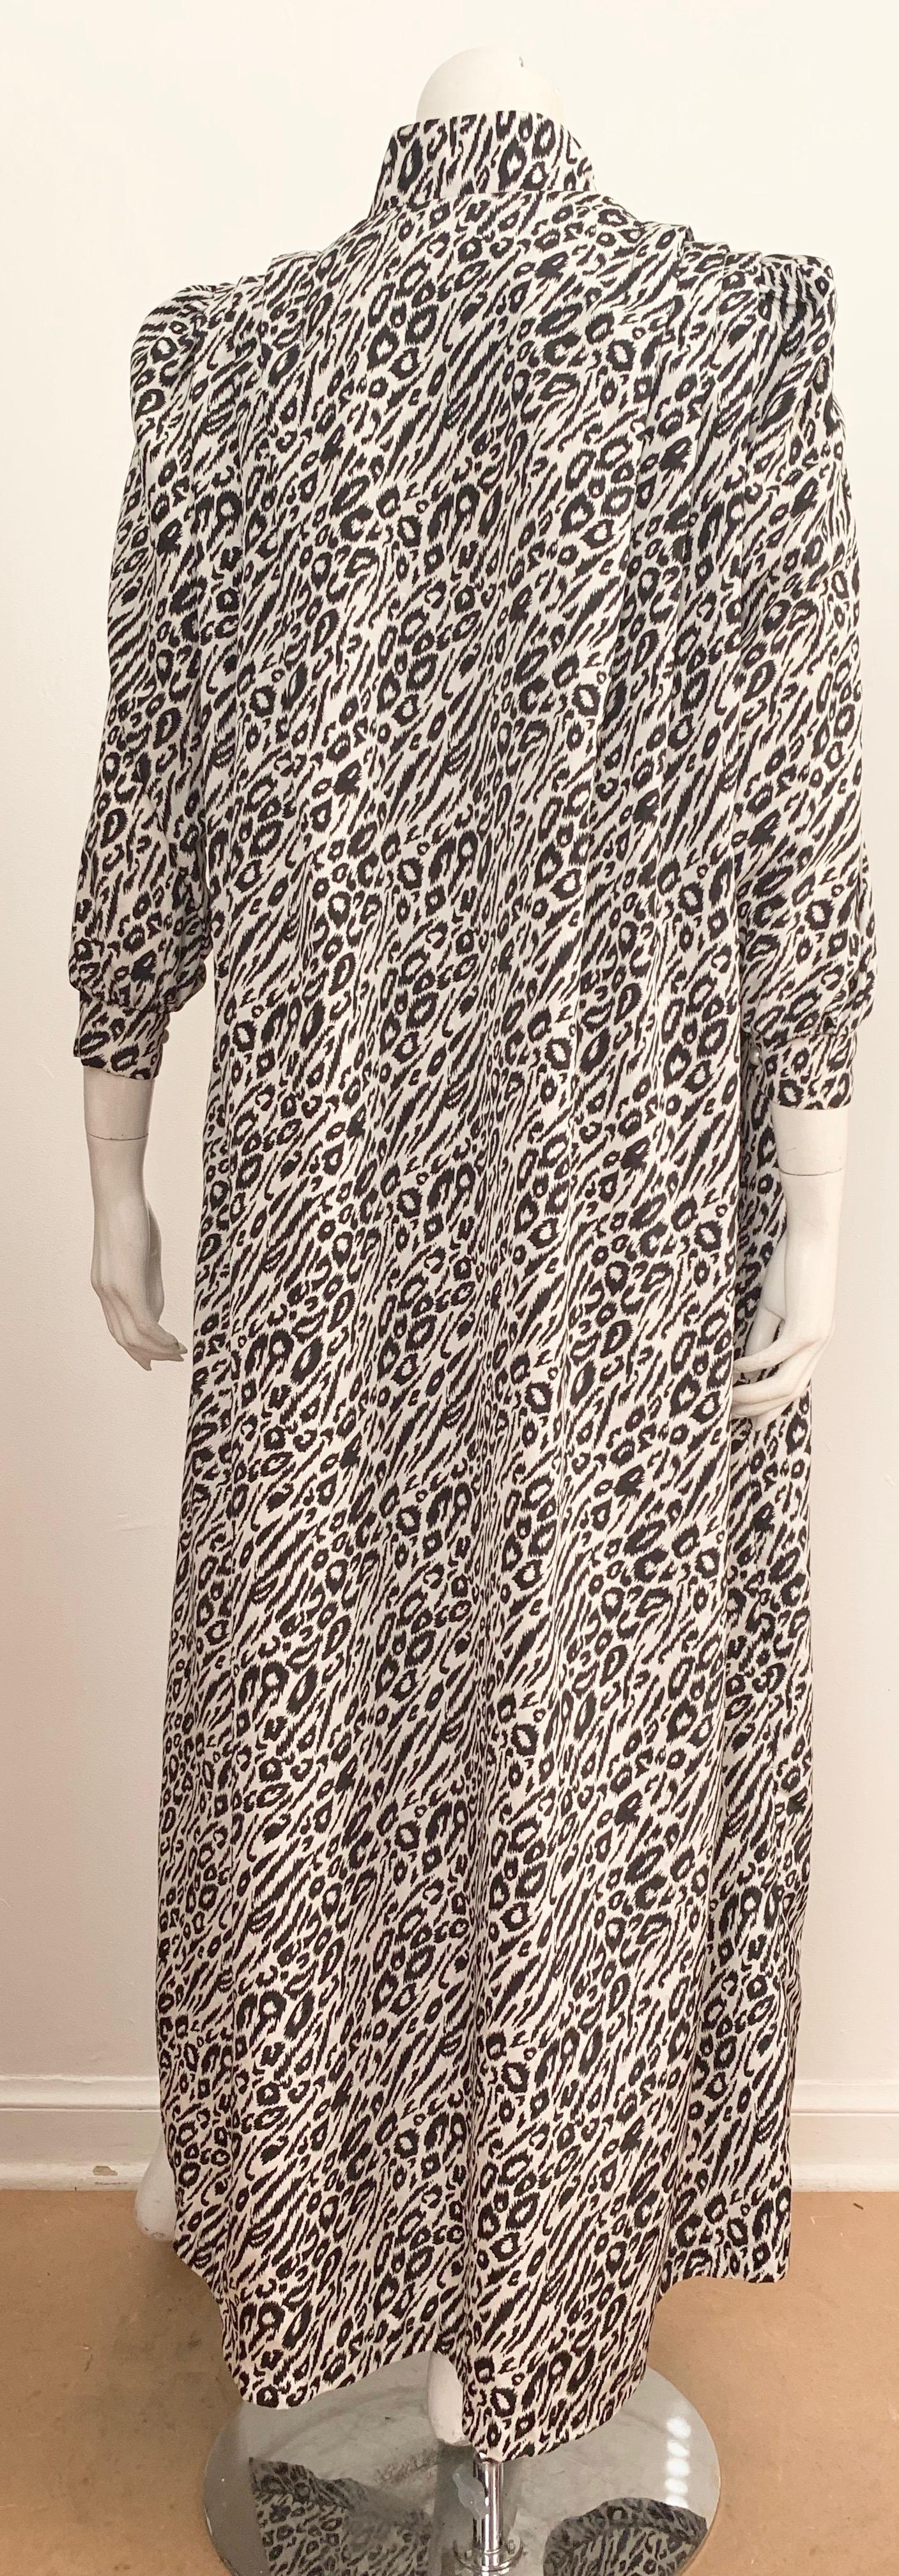 David Brown for Saks Fifth Avenue 1980s Caftan Loungewear Size Fits All. 1